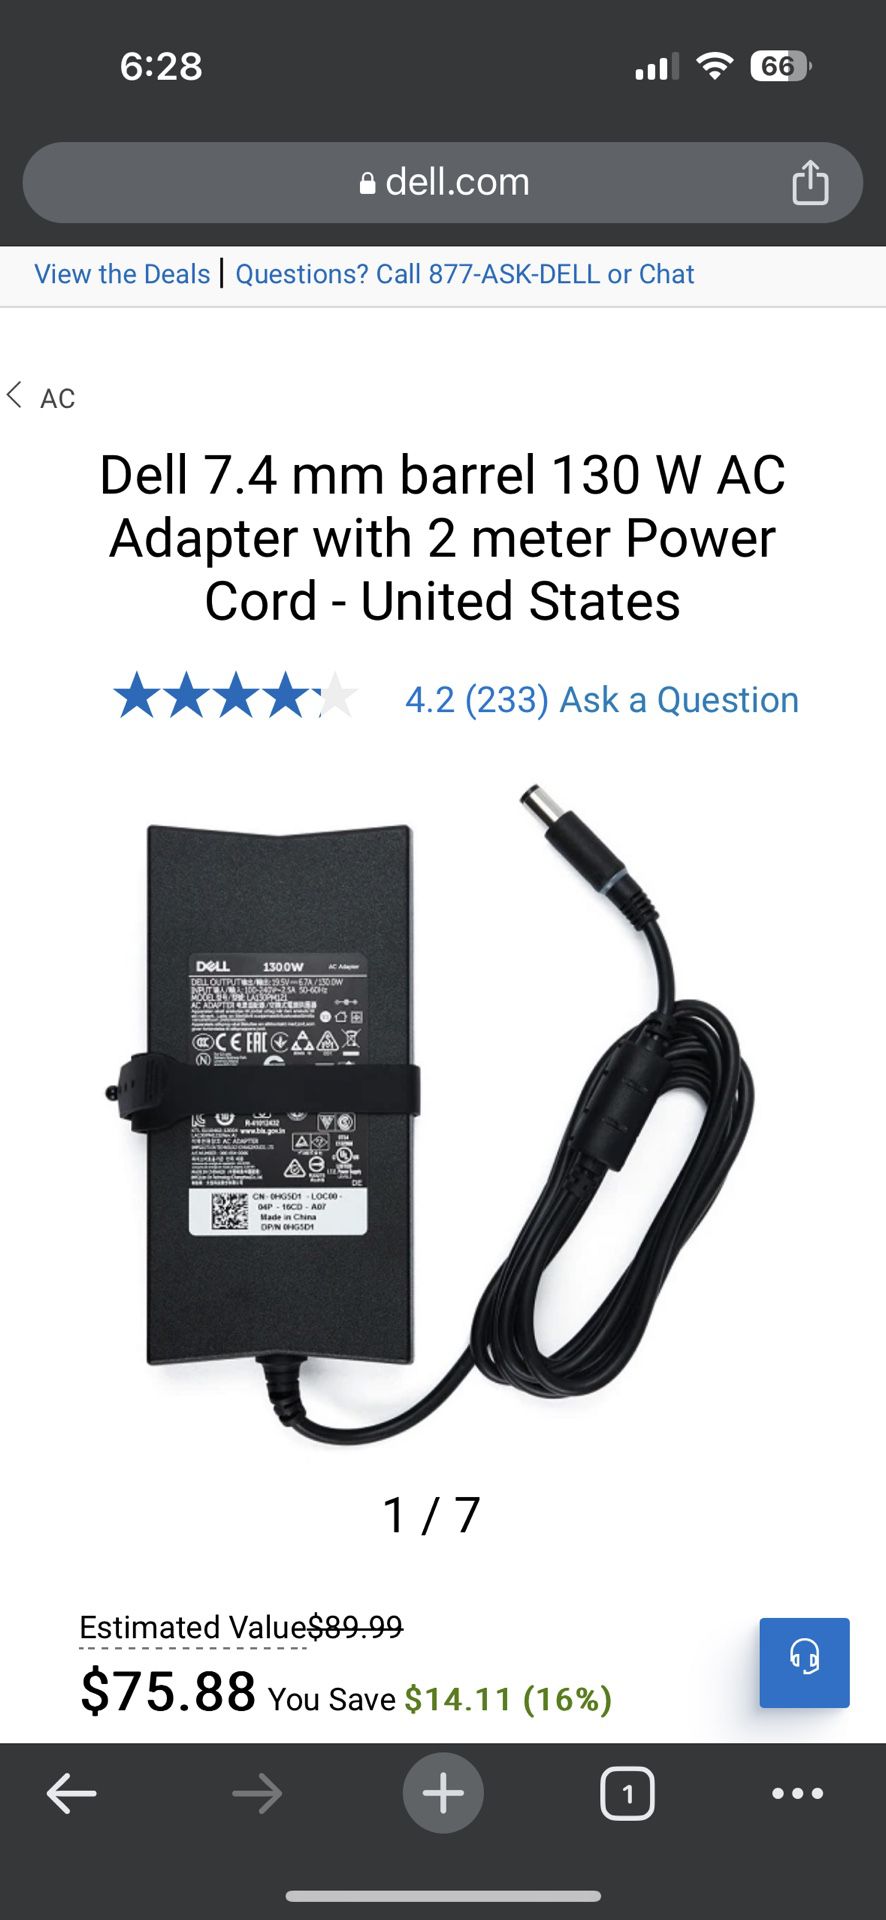 Dell 7.4 mm barrel 130 W AC Adapter with 2 meter Power Cord